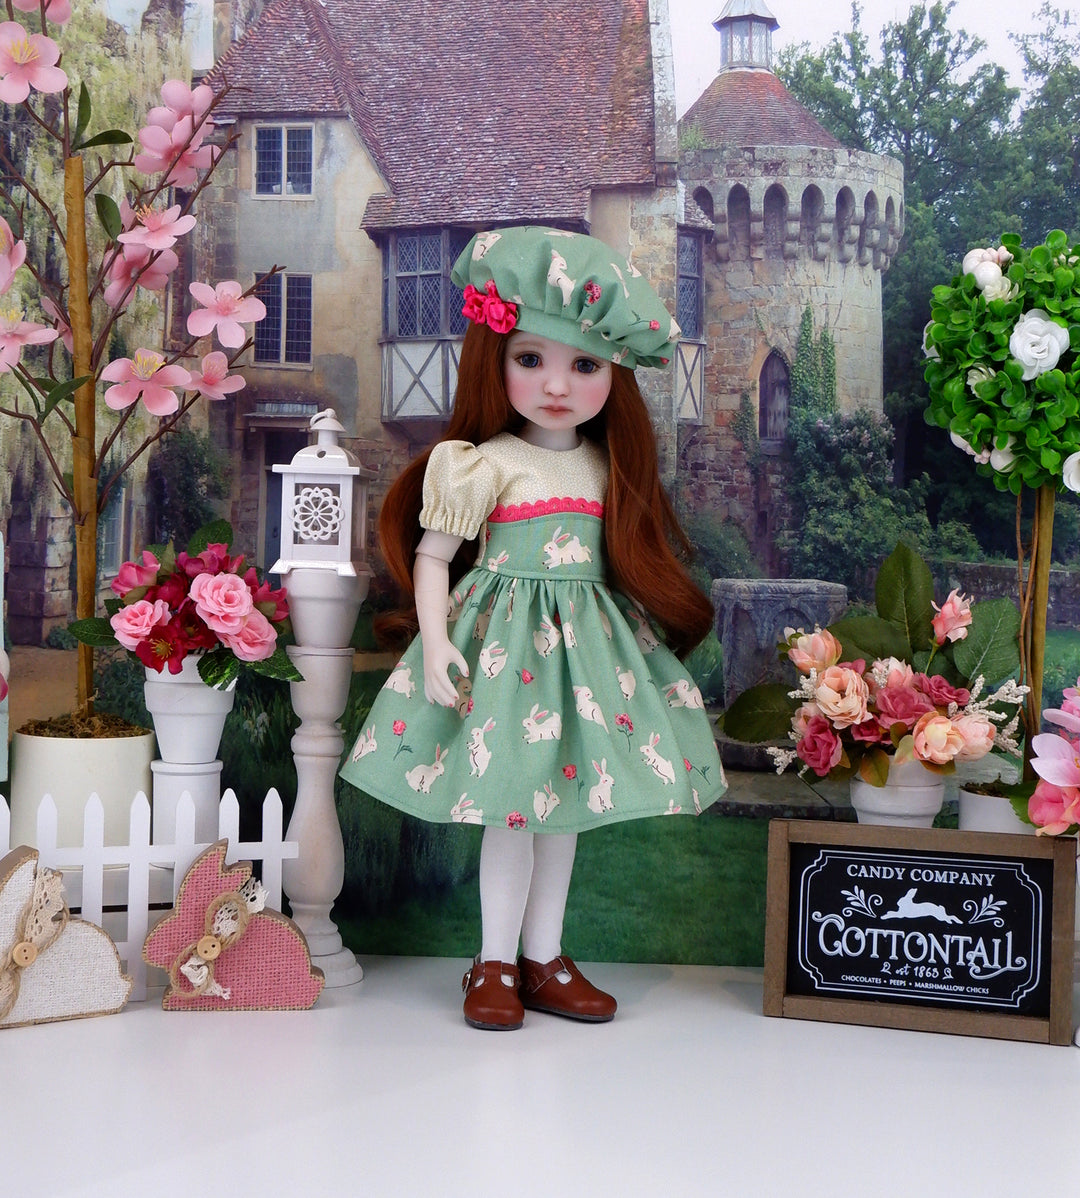 English Easter - dress and shoes for Ruby Red Fashion Friends doll